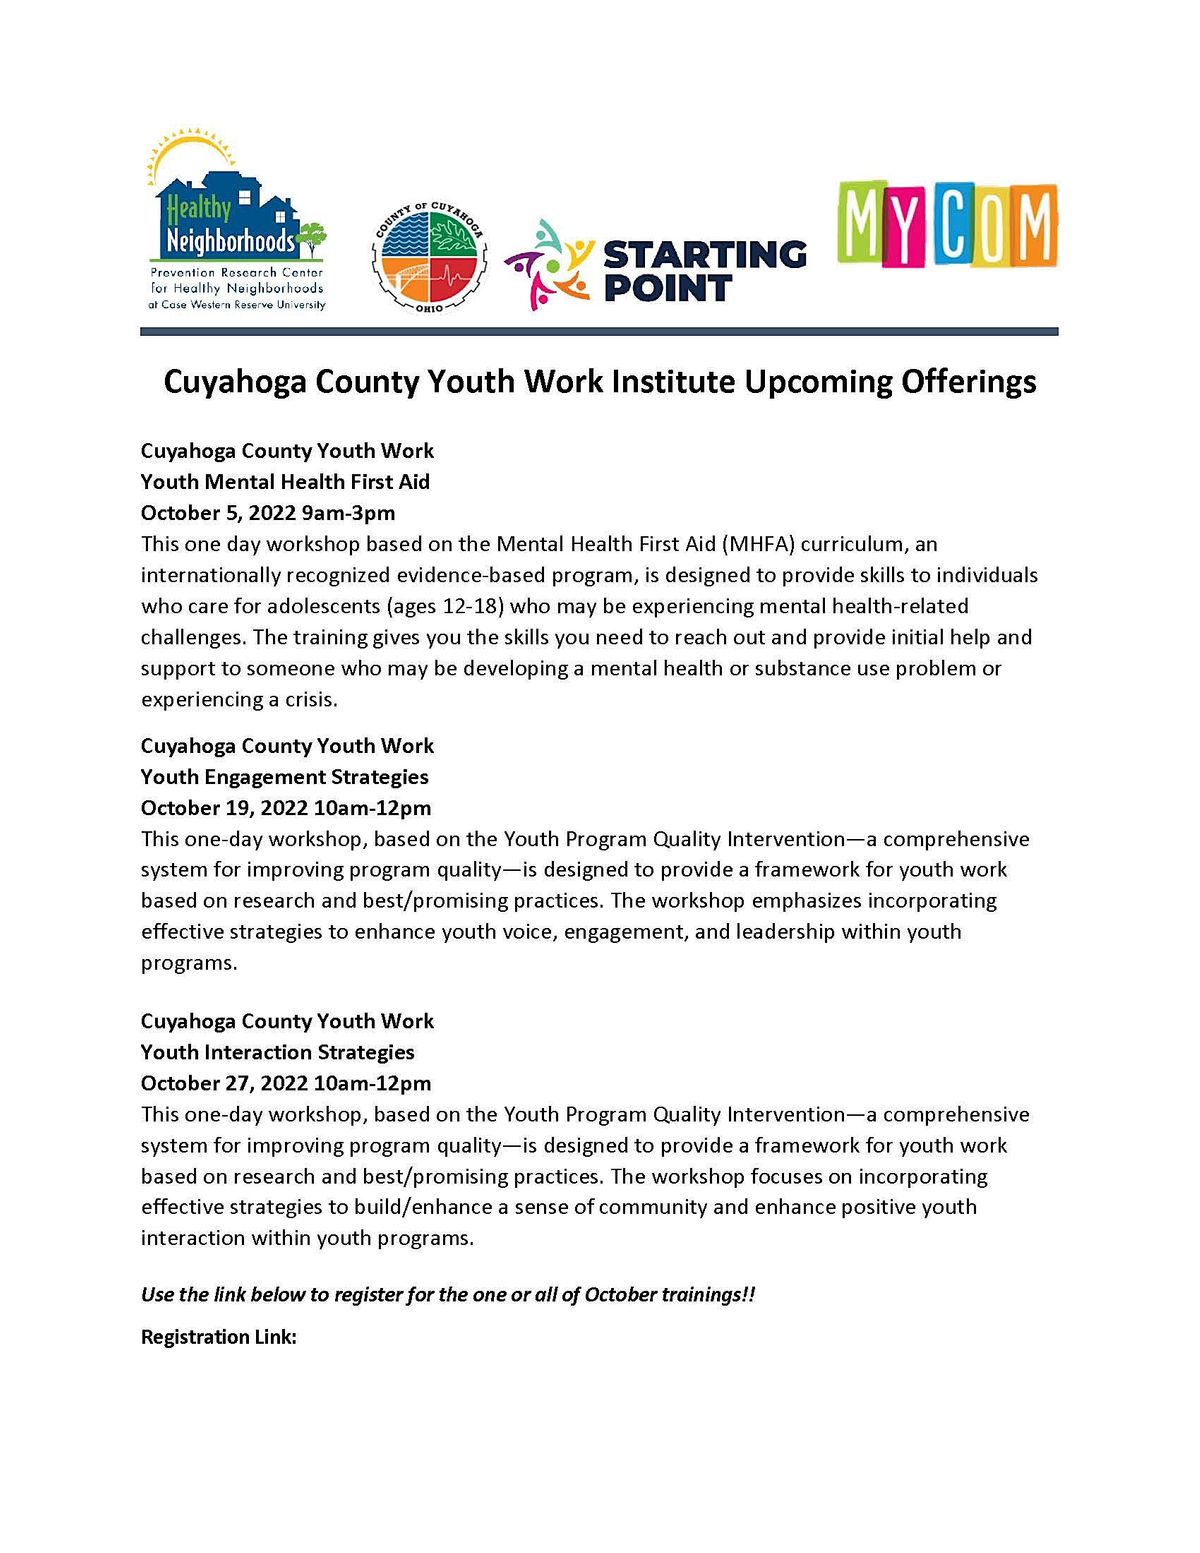 Cuyahoga County Youth Work \/Adult Mental Health First Aid